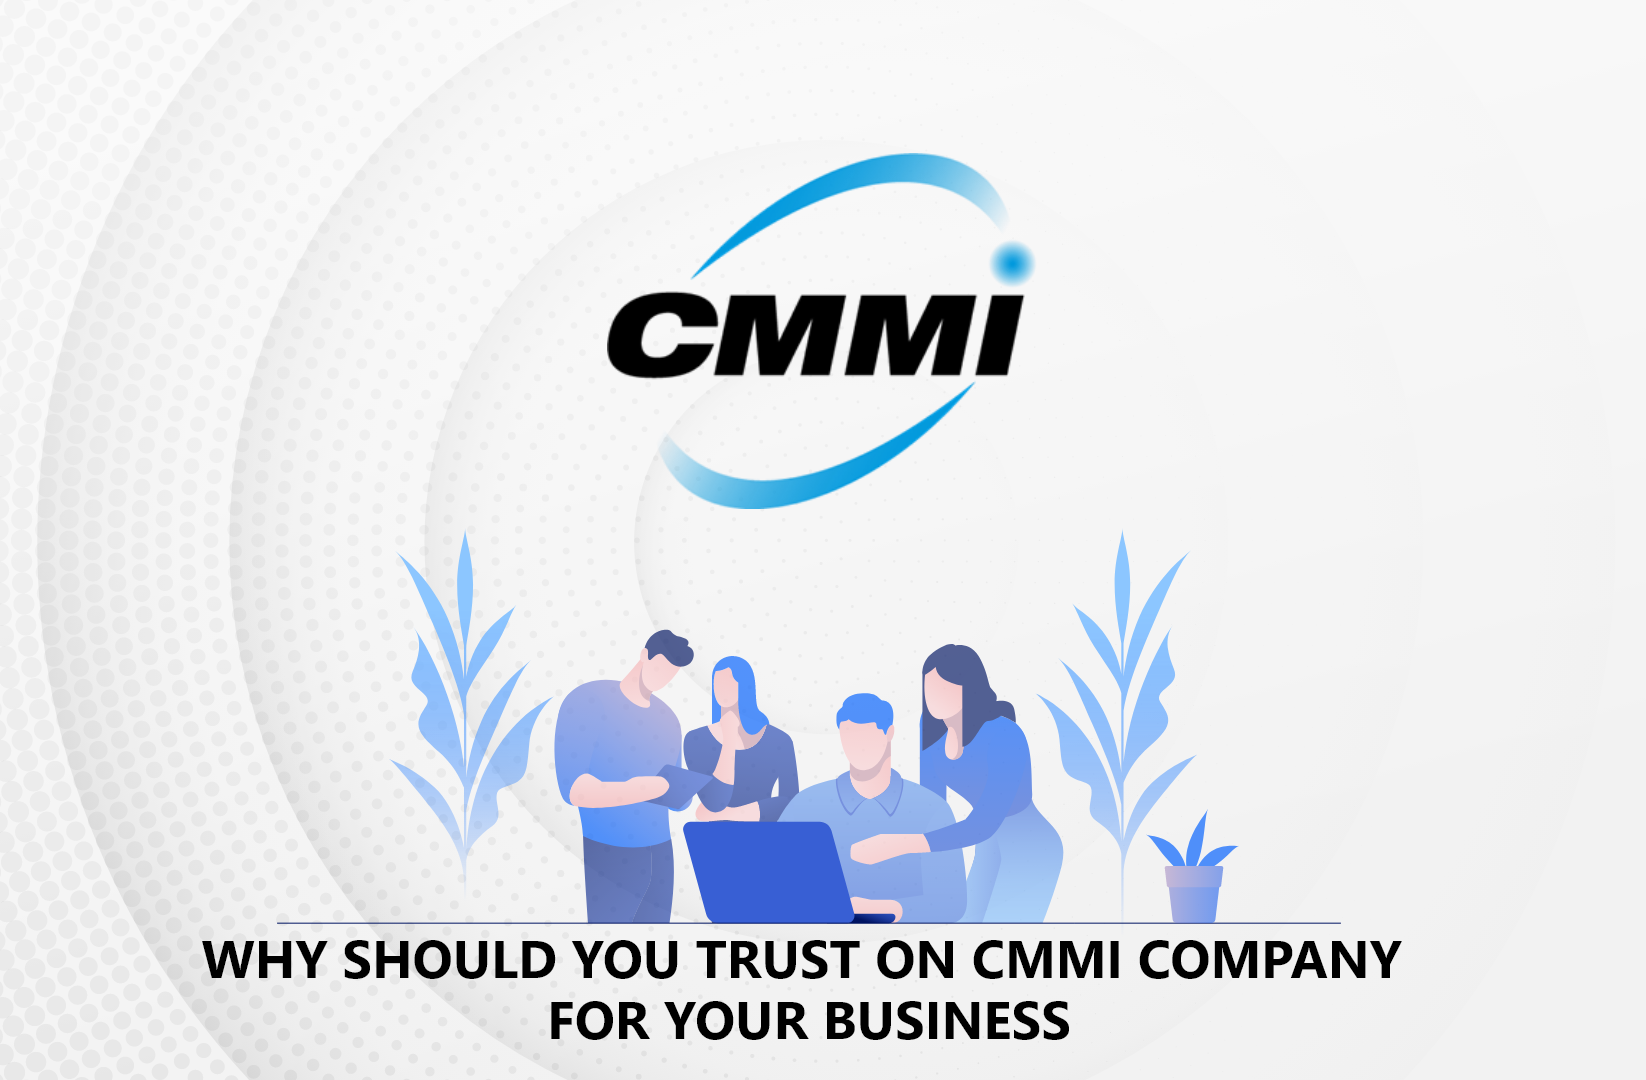 Why should you trust on CMMI company for your business?